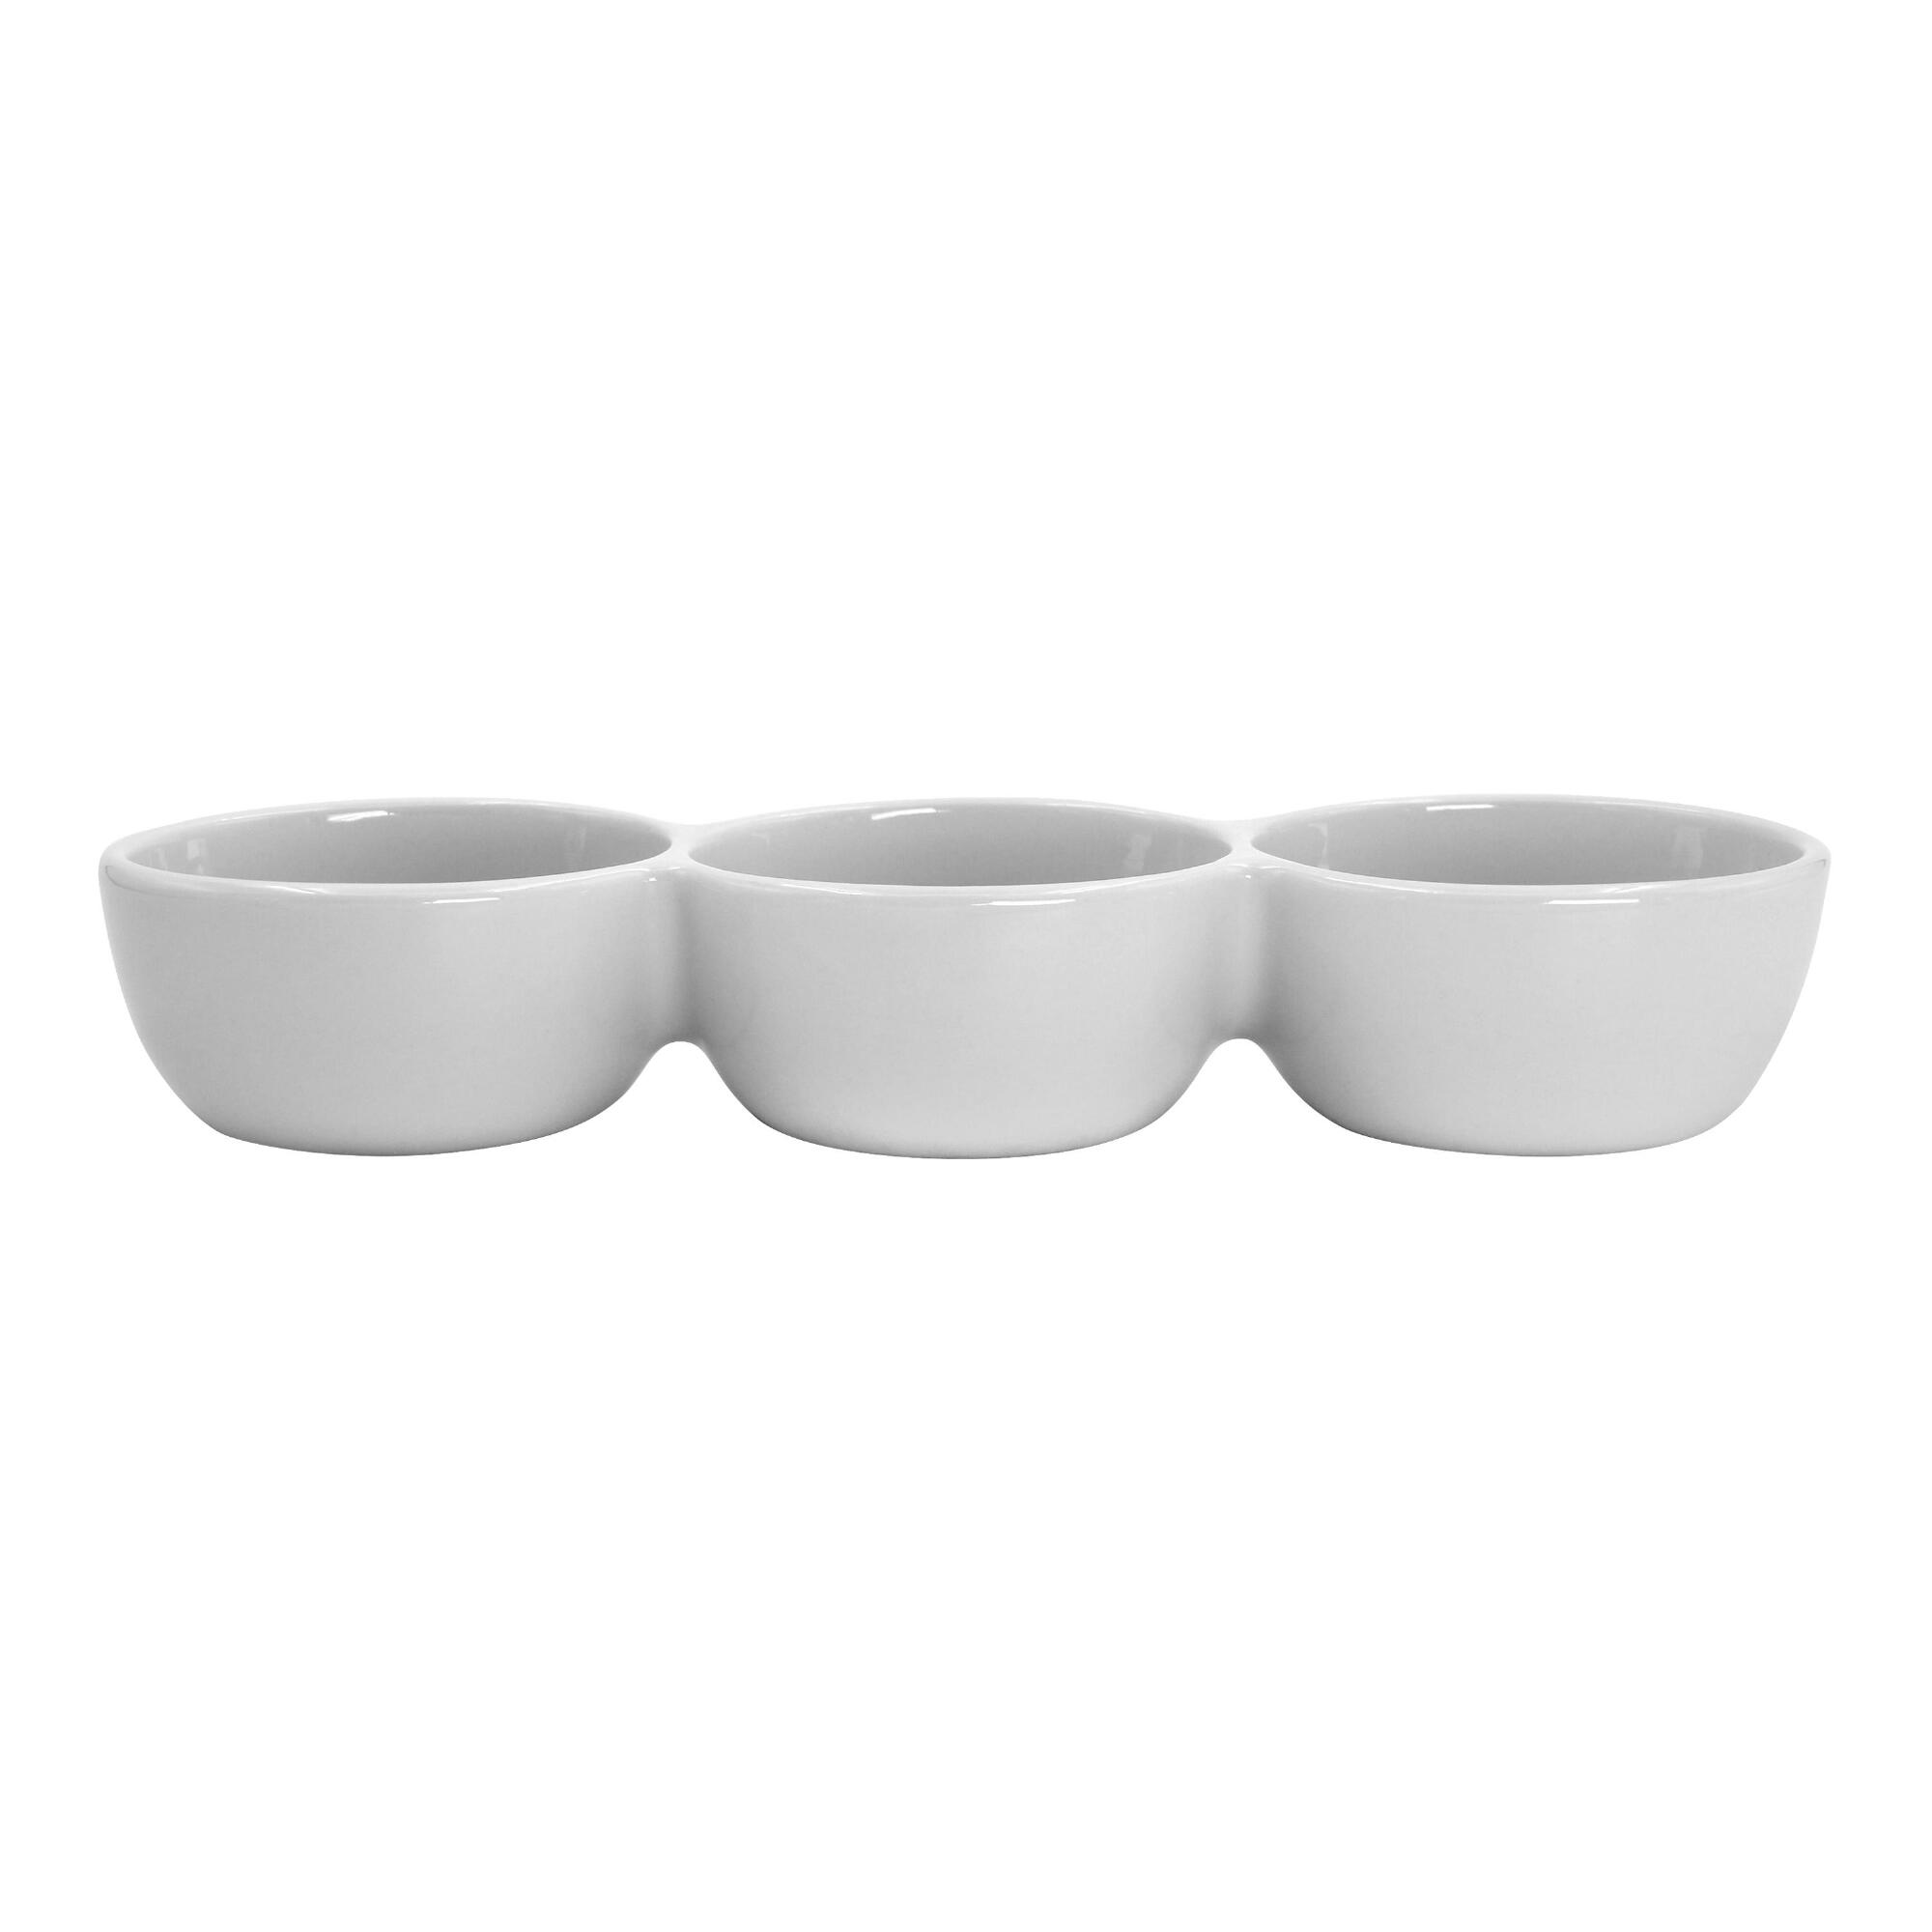 White Porcelain Coupe Connected Dipping Bowls by World Market